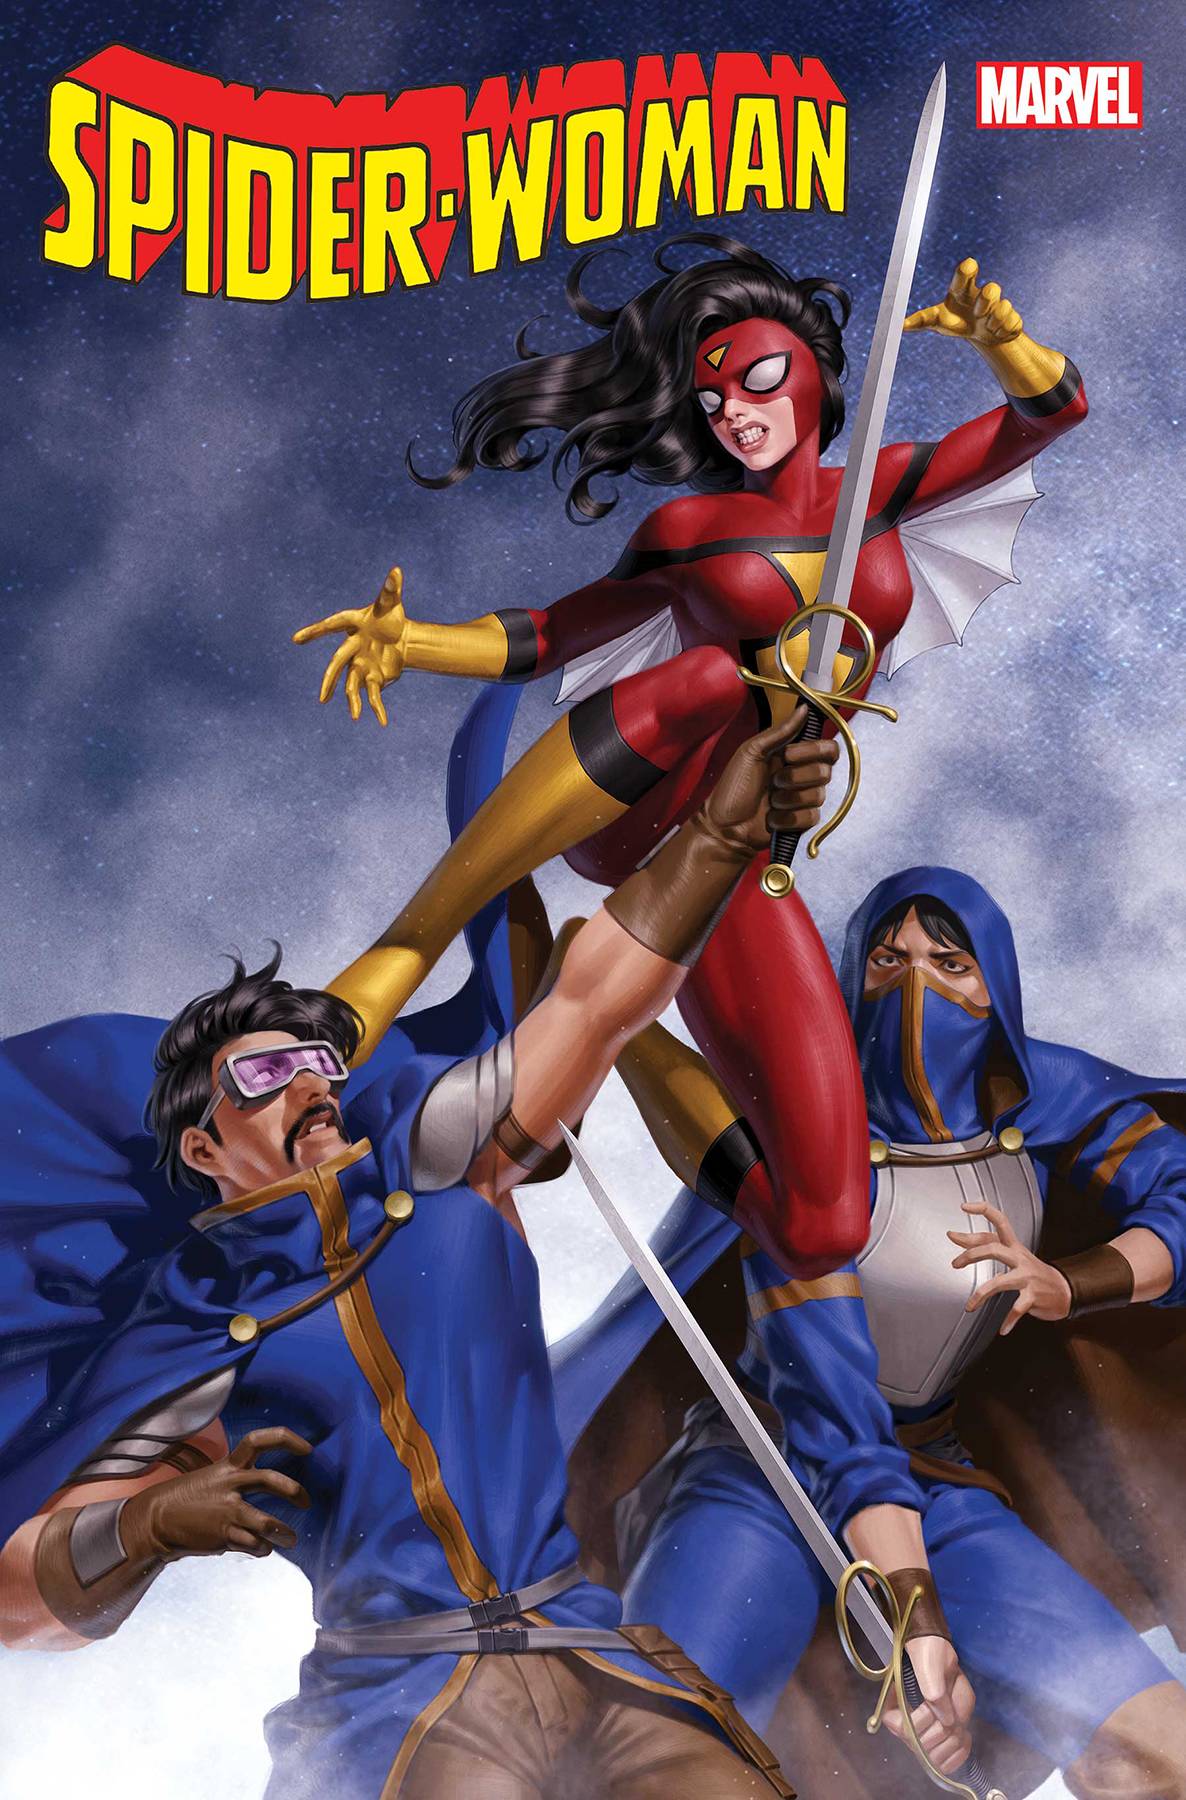 Spider-Woman #12 (May 12 2021) - State of Comics